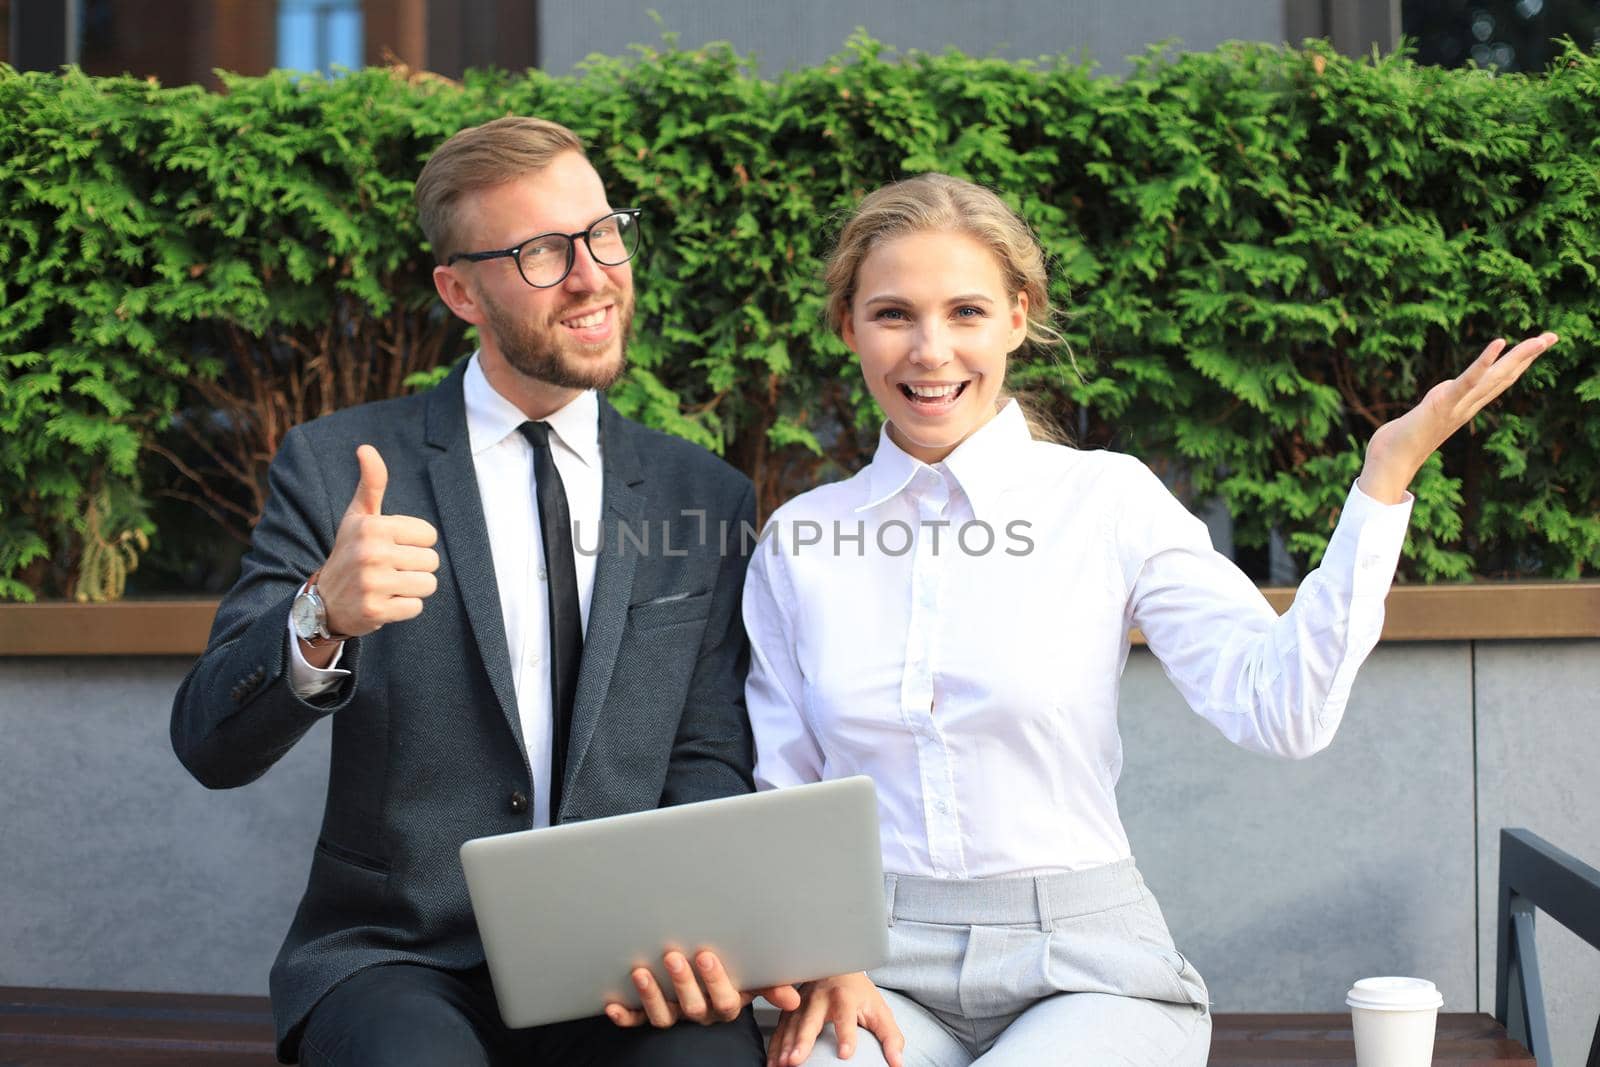 Office colleagues using laptop computer and showing thumbs up while sitting on a bench outdoor